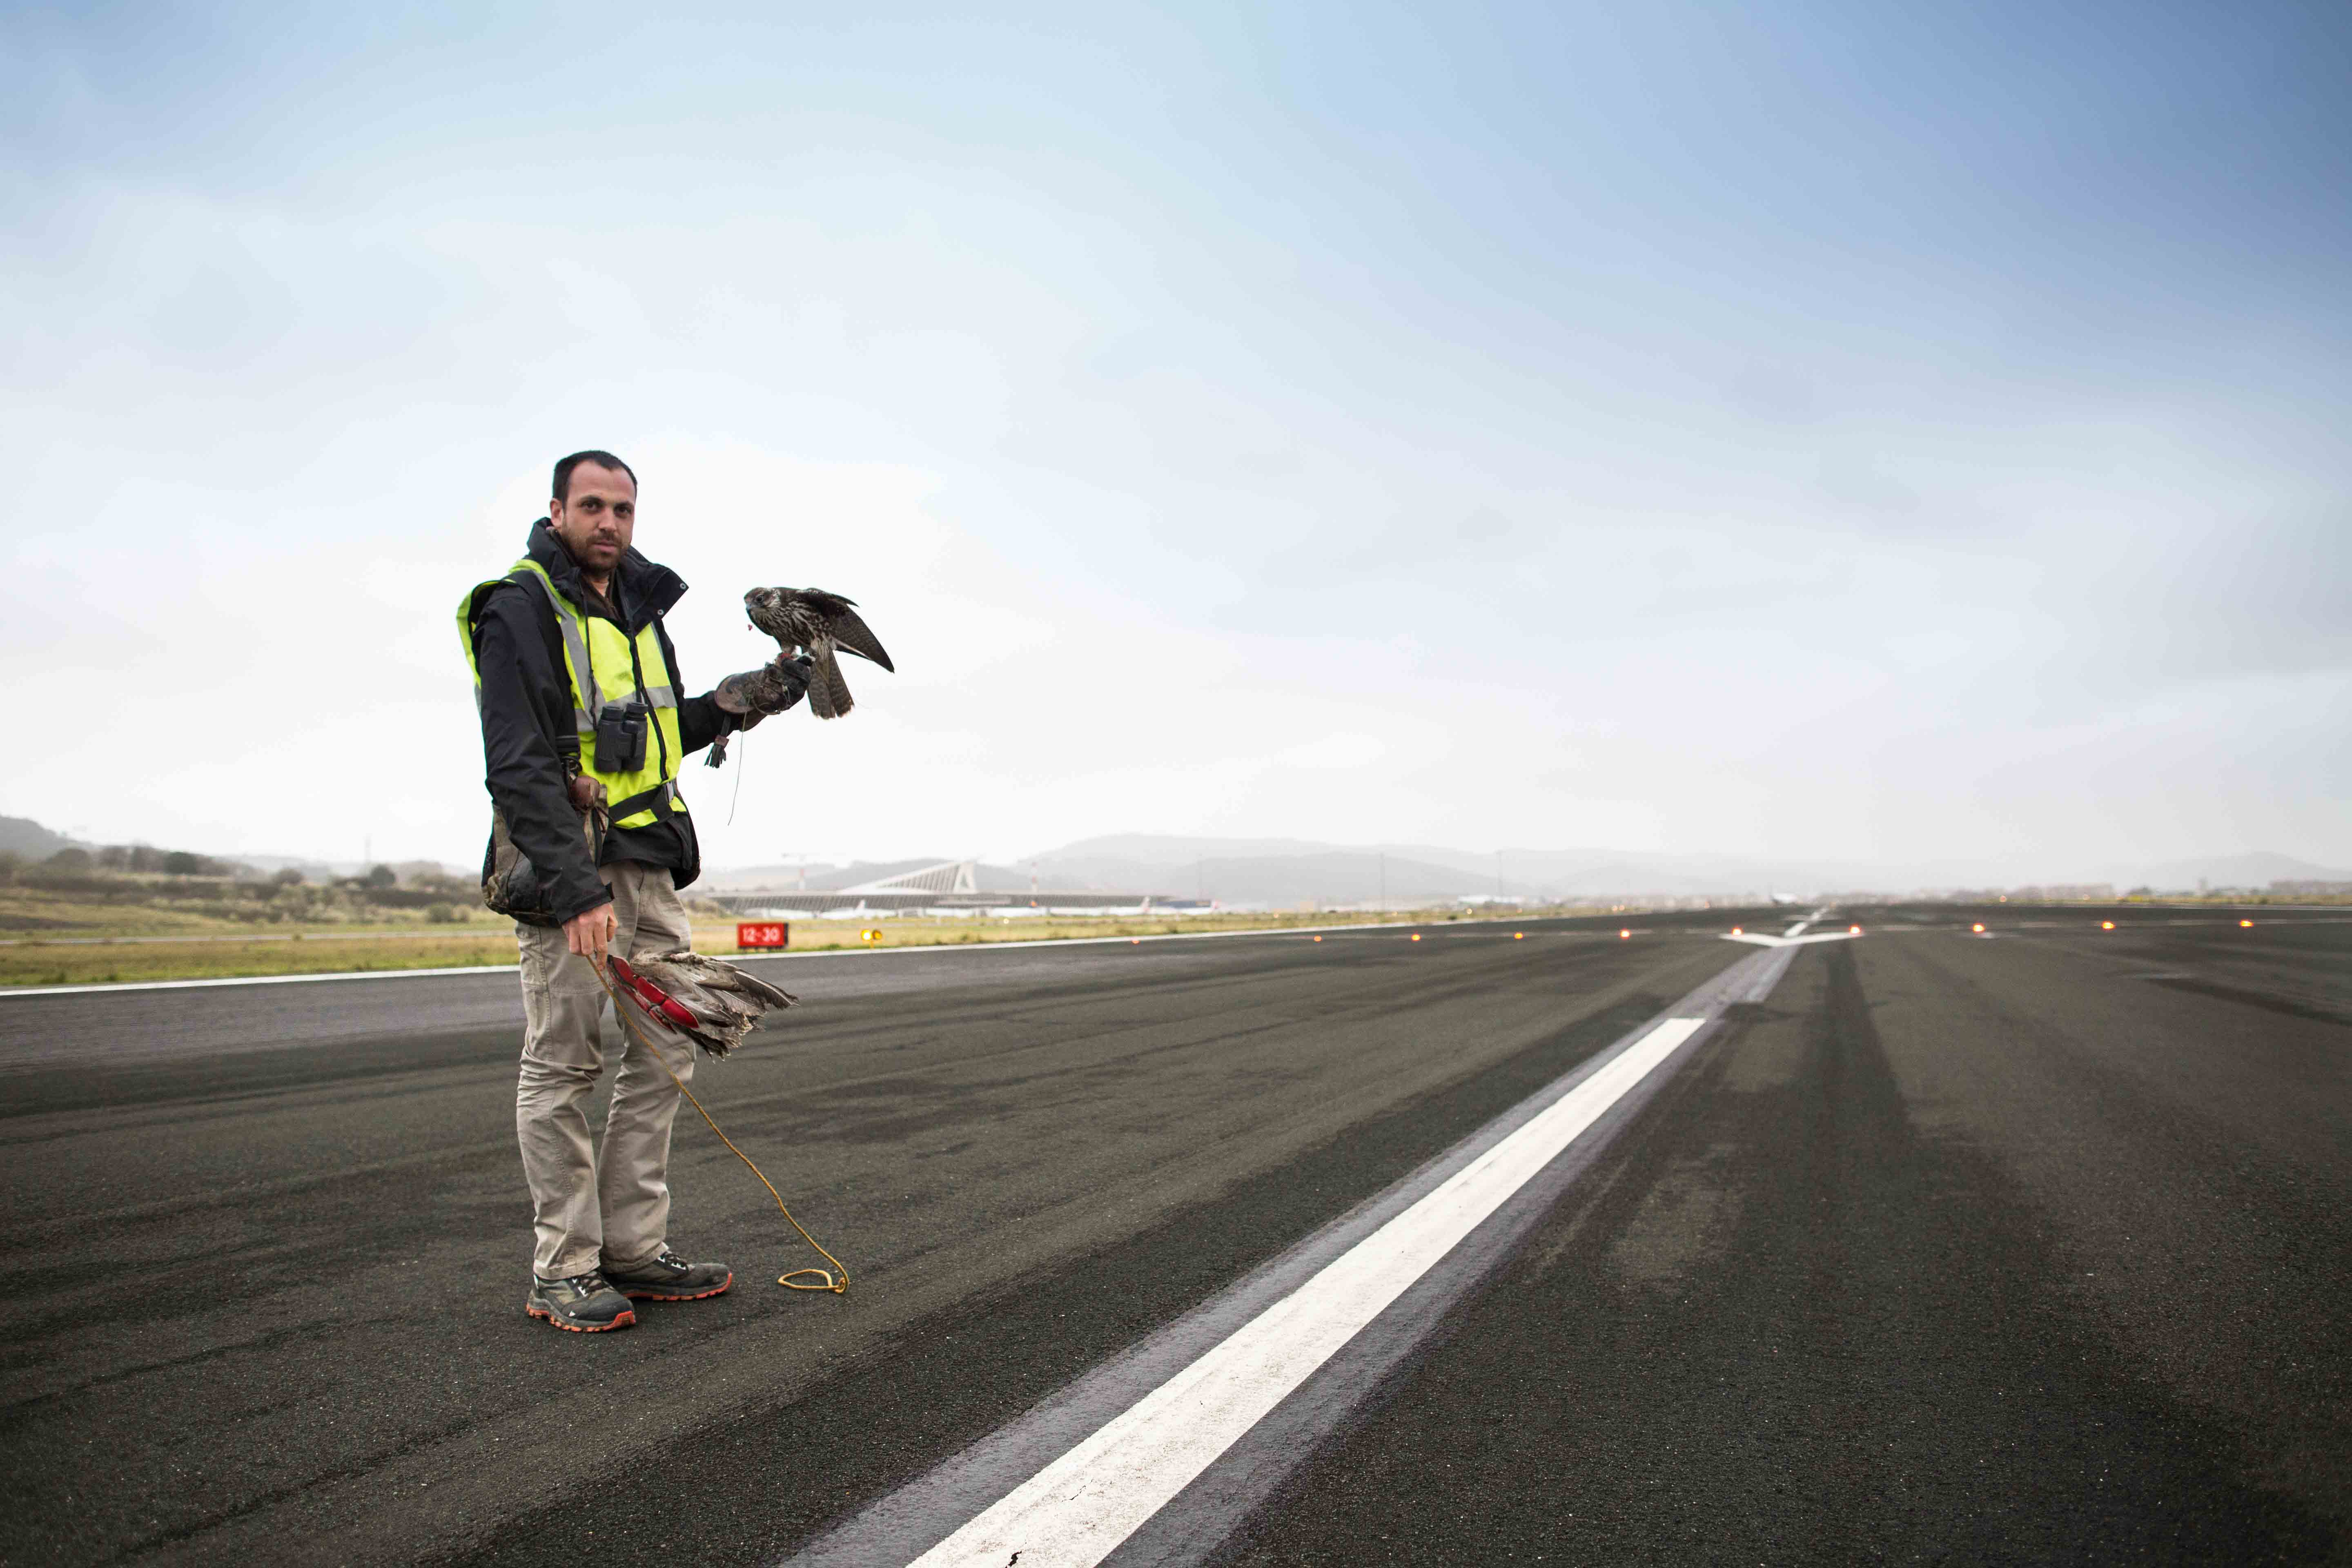 Guijarro: "Most flights don't get the prey; the animals run away from the taxiway."